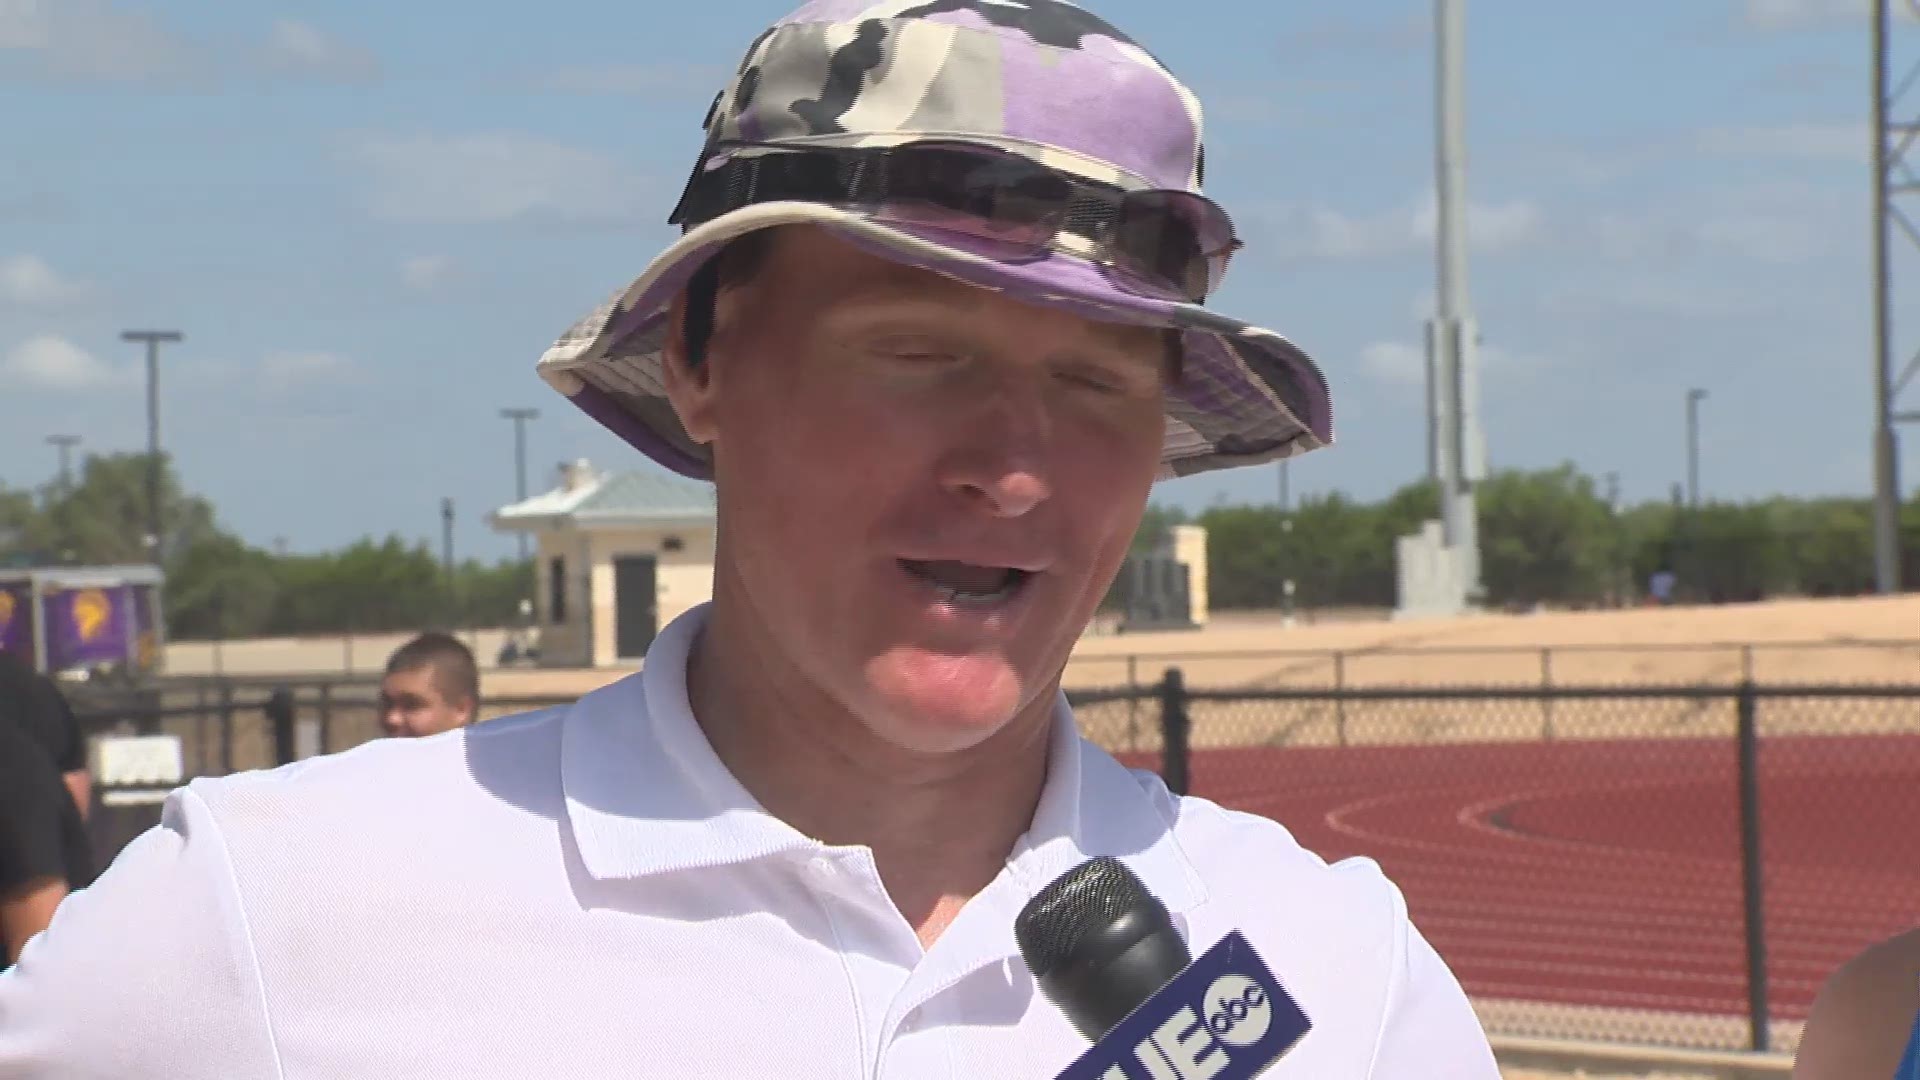 Liberty hill panthers coach jeff walker expects team to build on